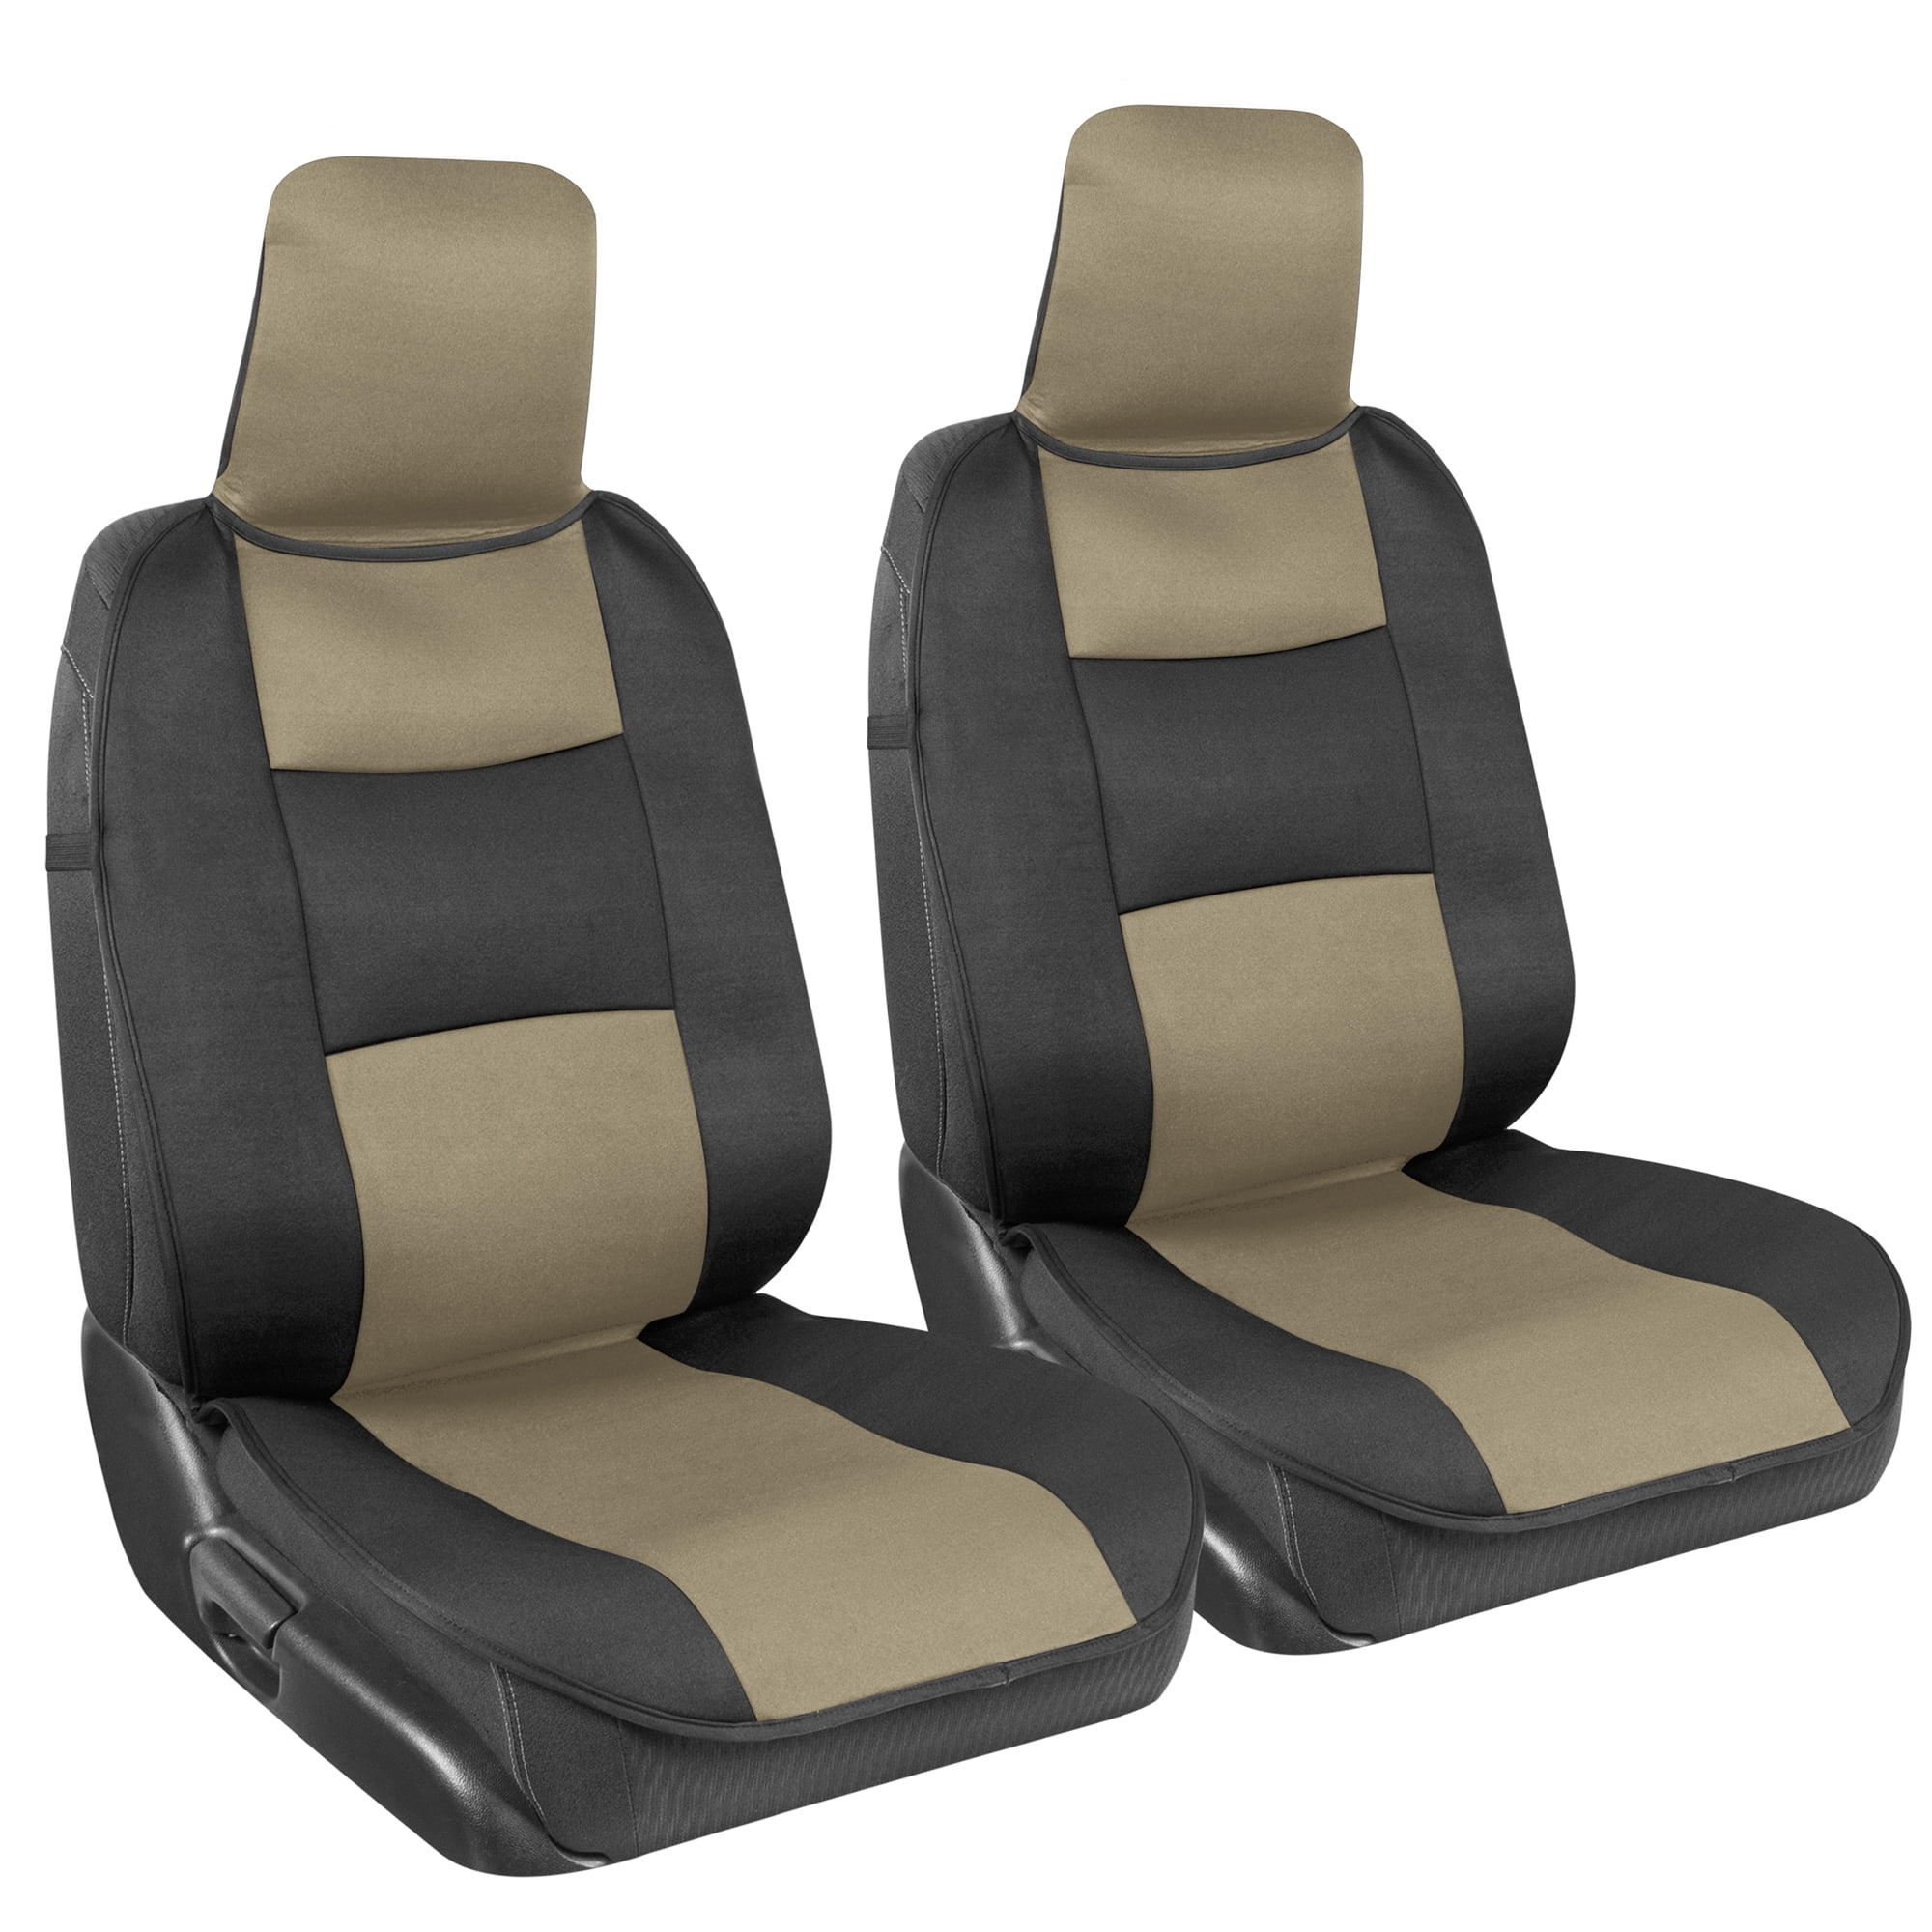 BDK EasyFit Universal Car Seat Covers for Front Seats, Gray